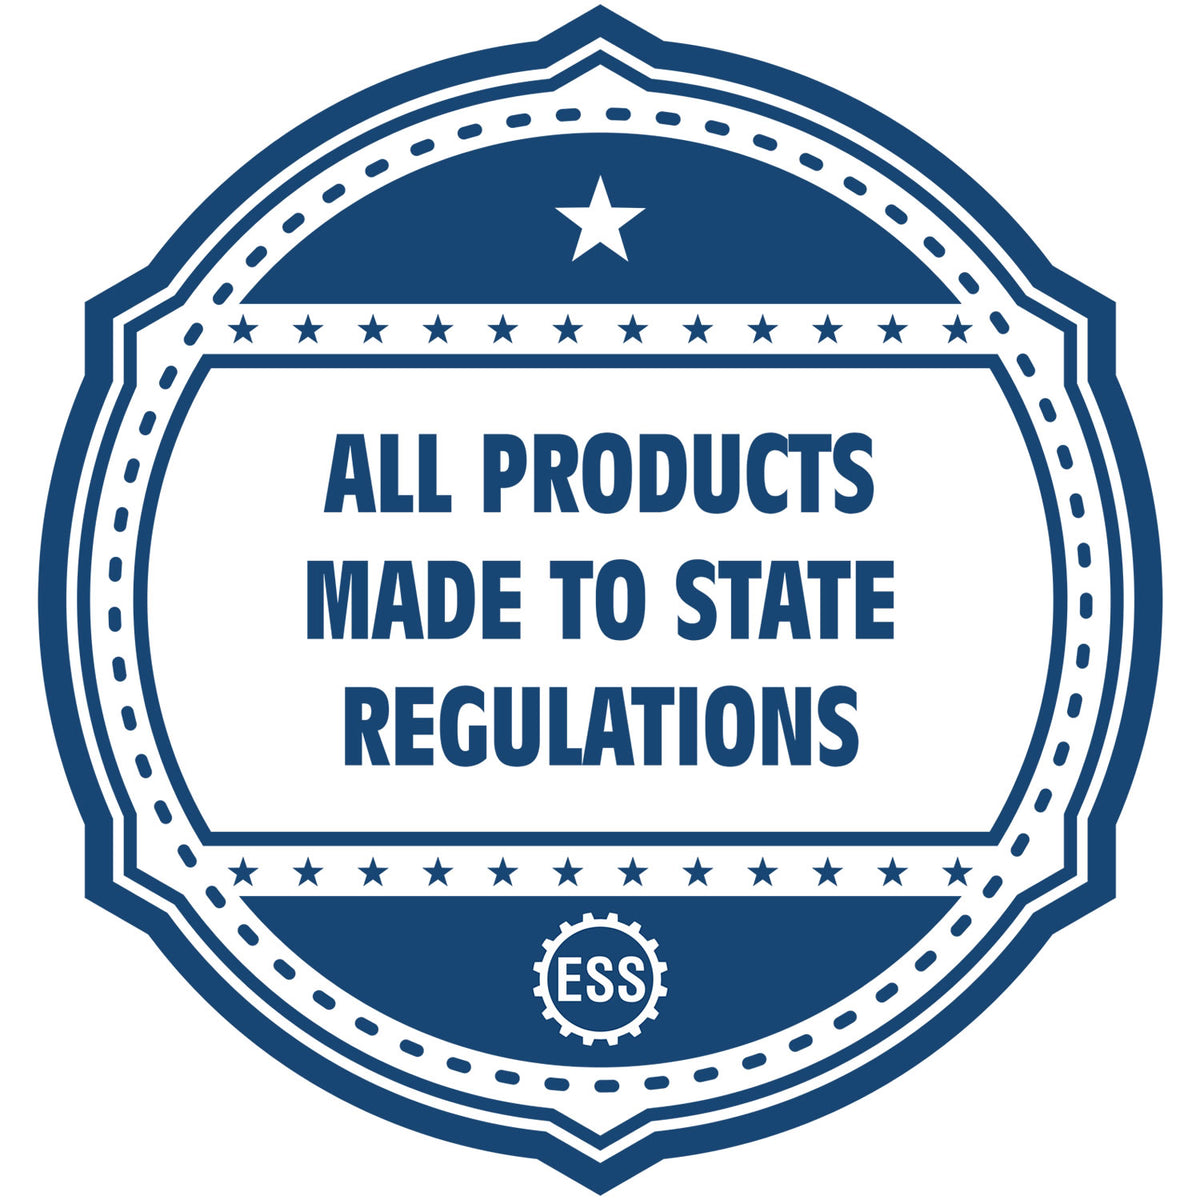 An icon or badge element for the Slim Pre-Inked Massachusetts Professional Engineer Seal Stamp showing that this product is made in compliance with state regulations.